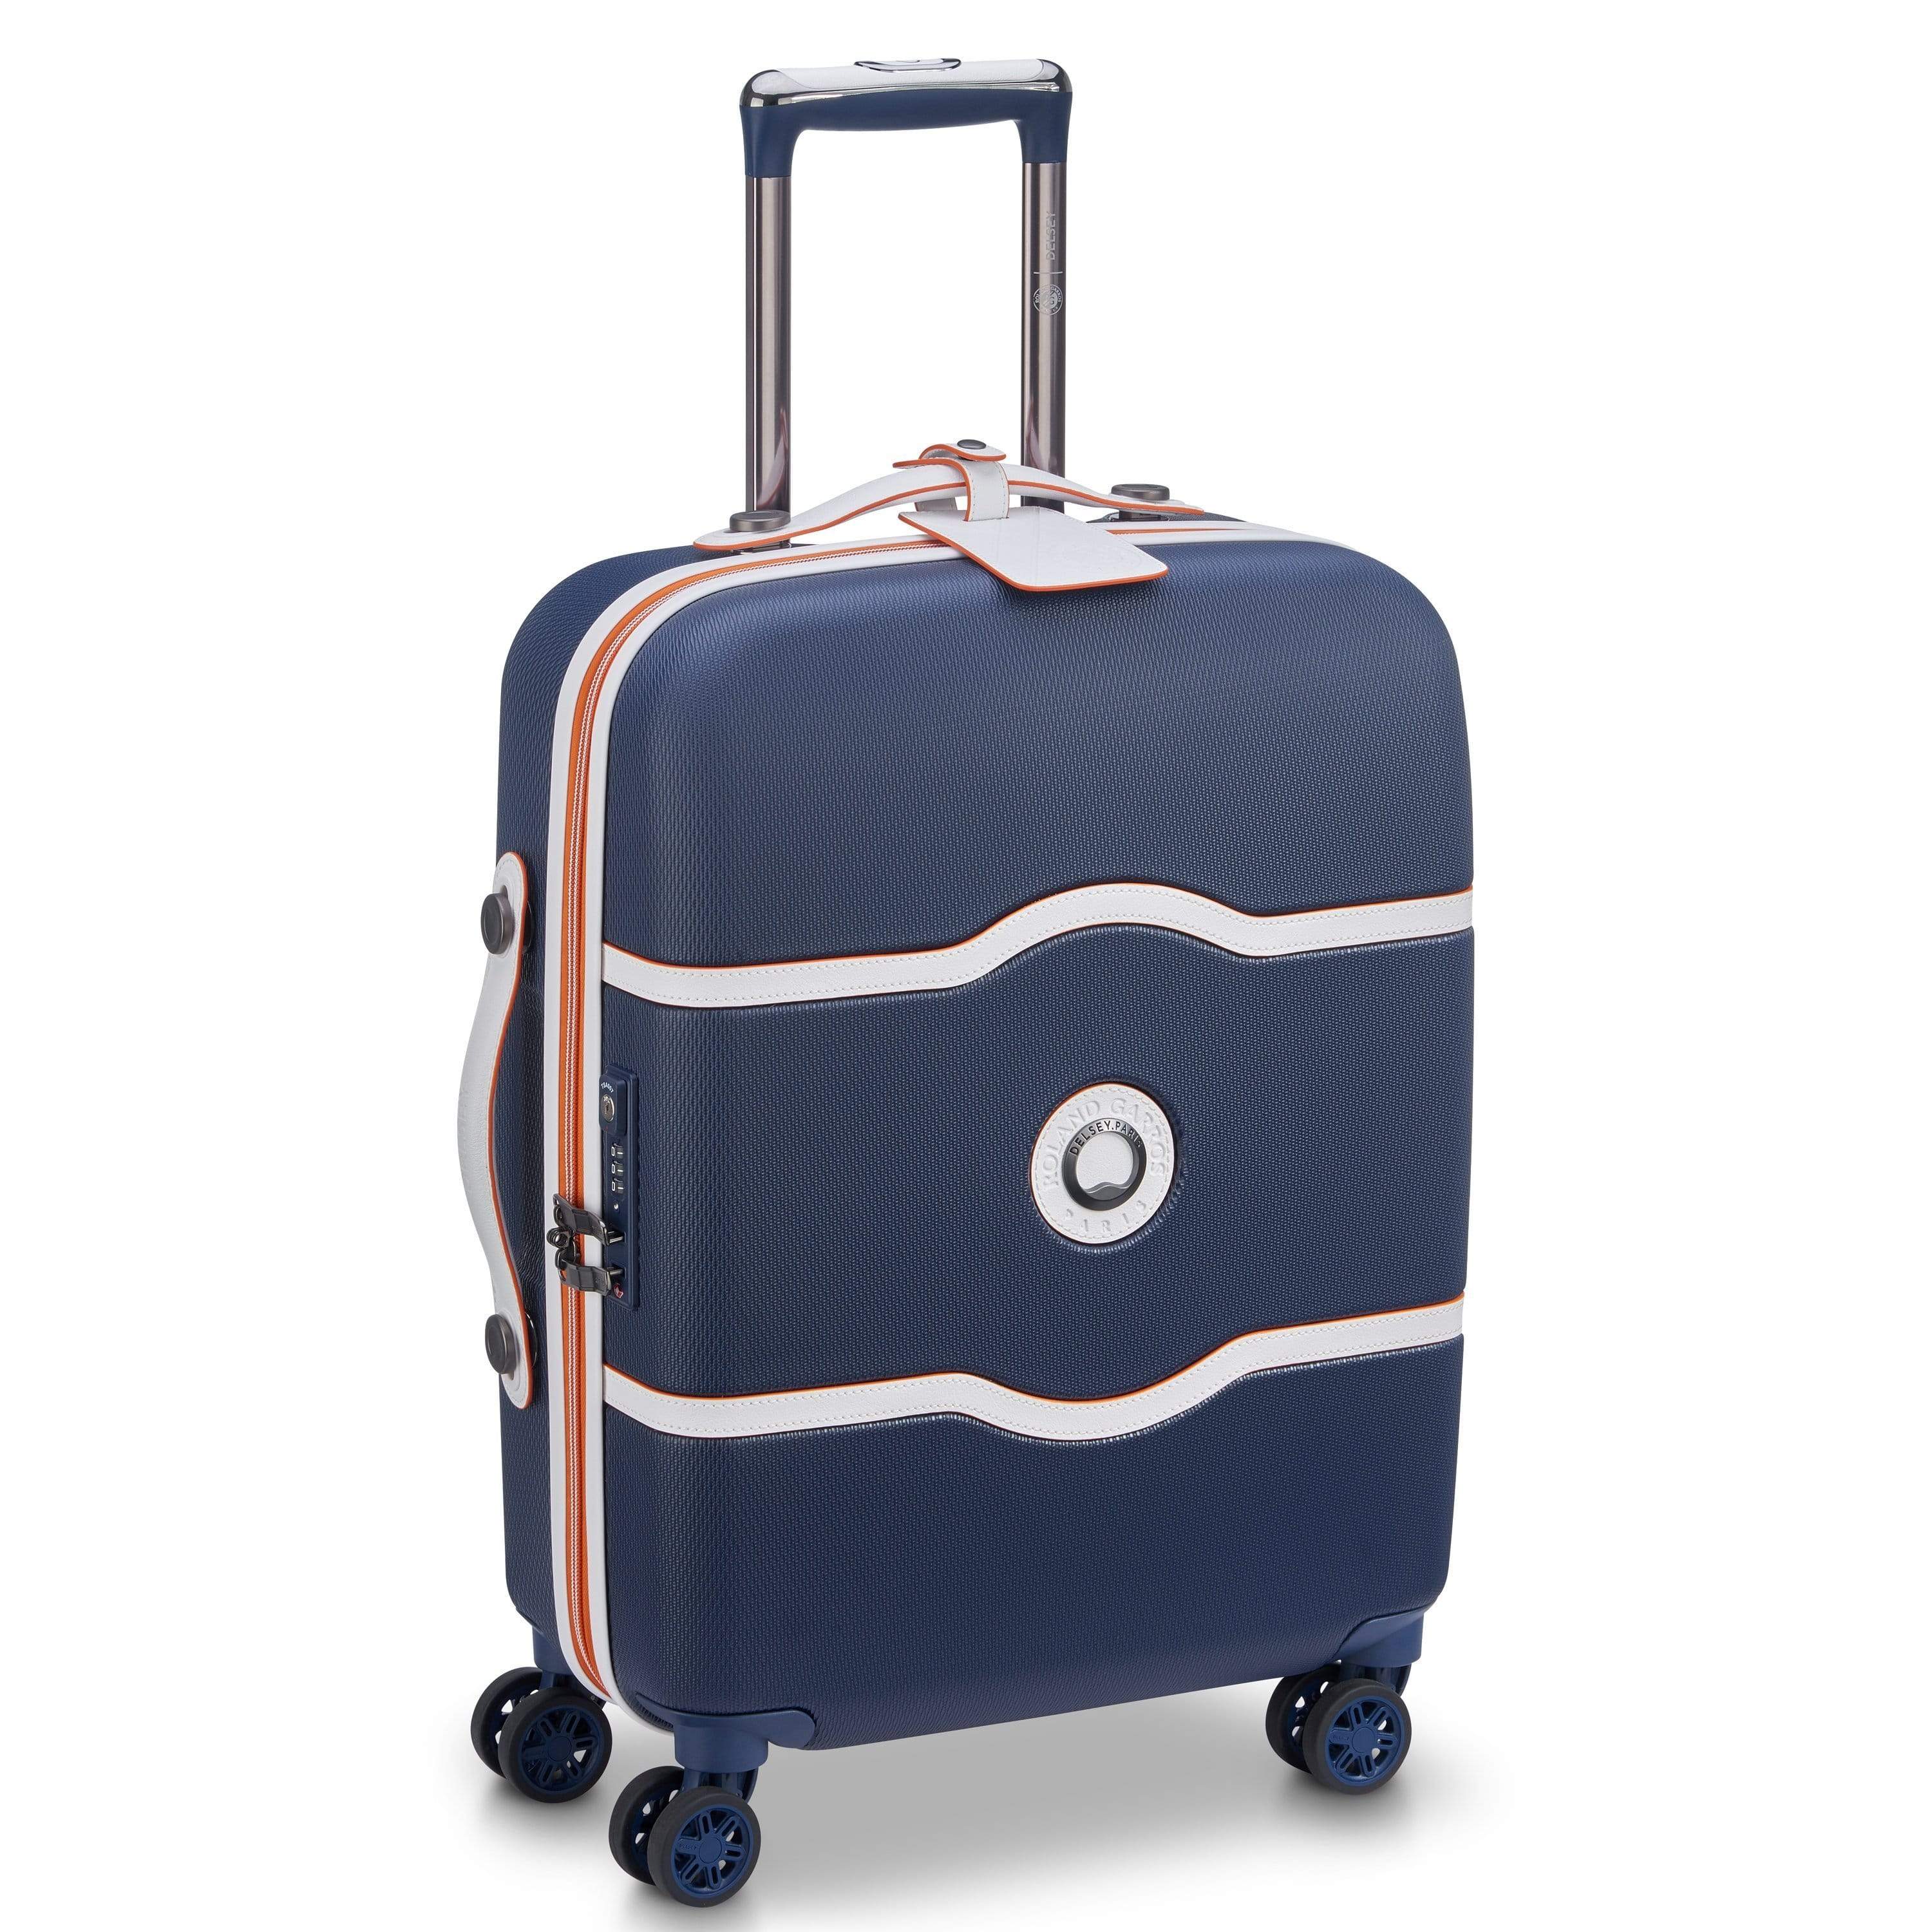 Delsey Chatelet Air 55cm Hardcase 4 Double Wheel Cabin Luggage Trolley Navy - 00167280902